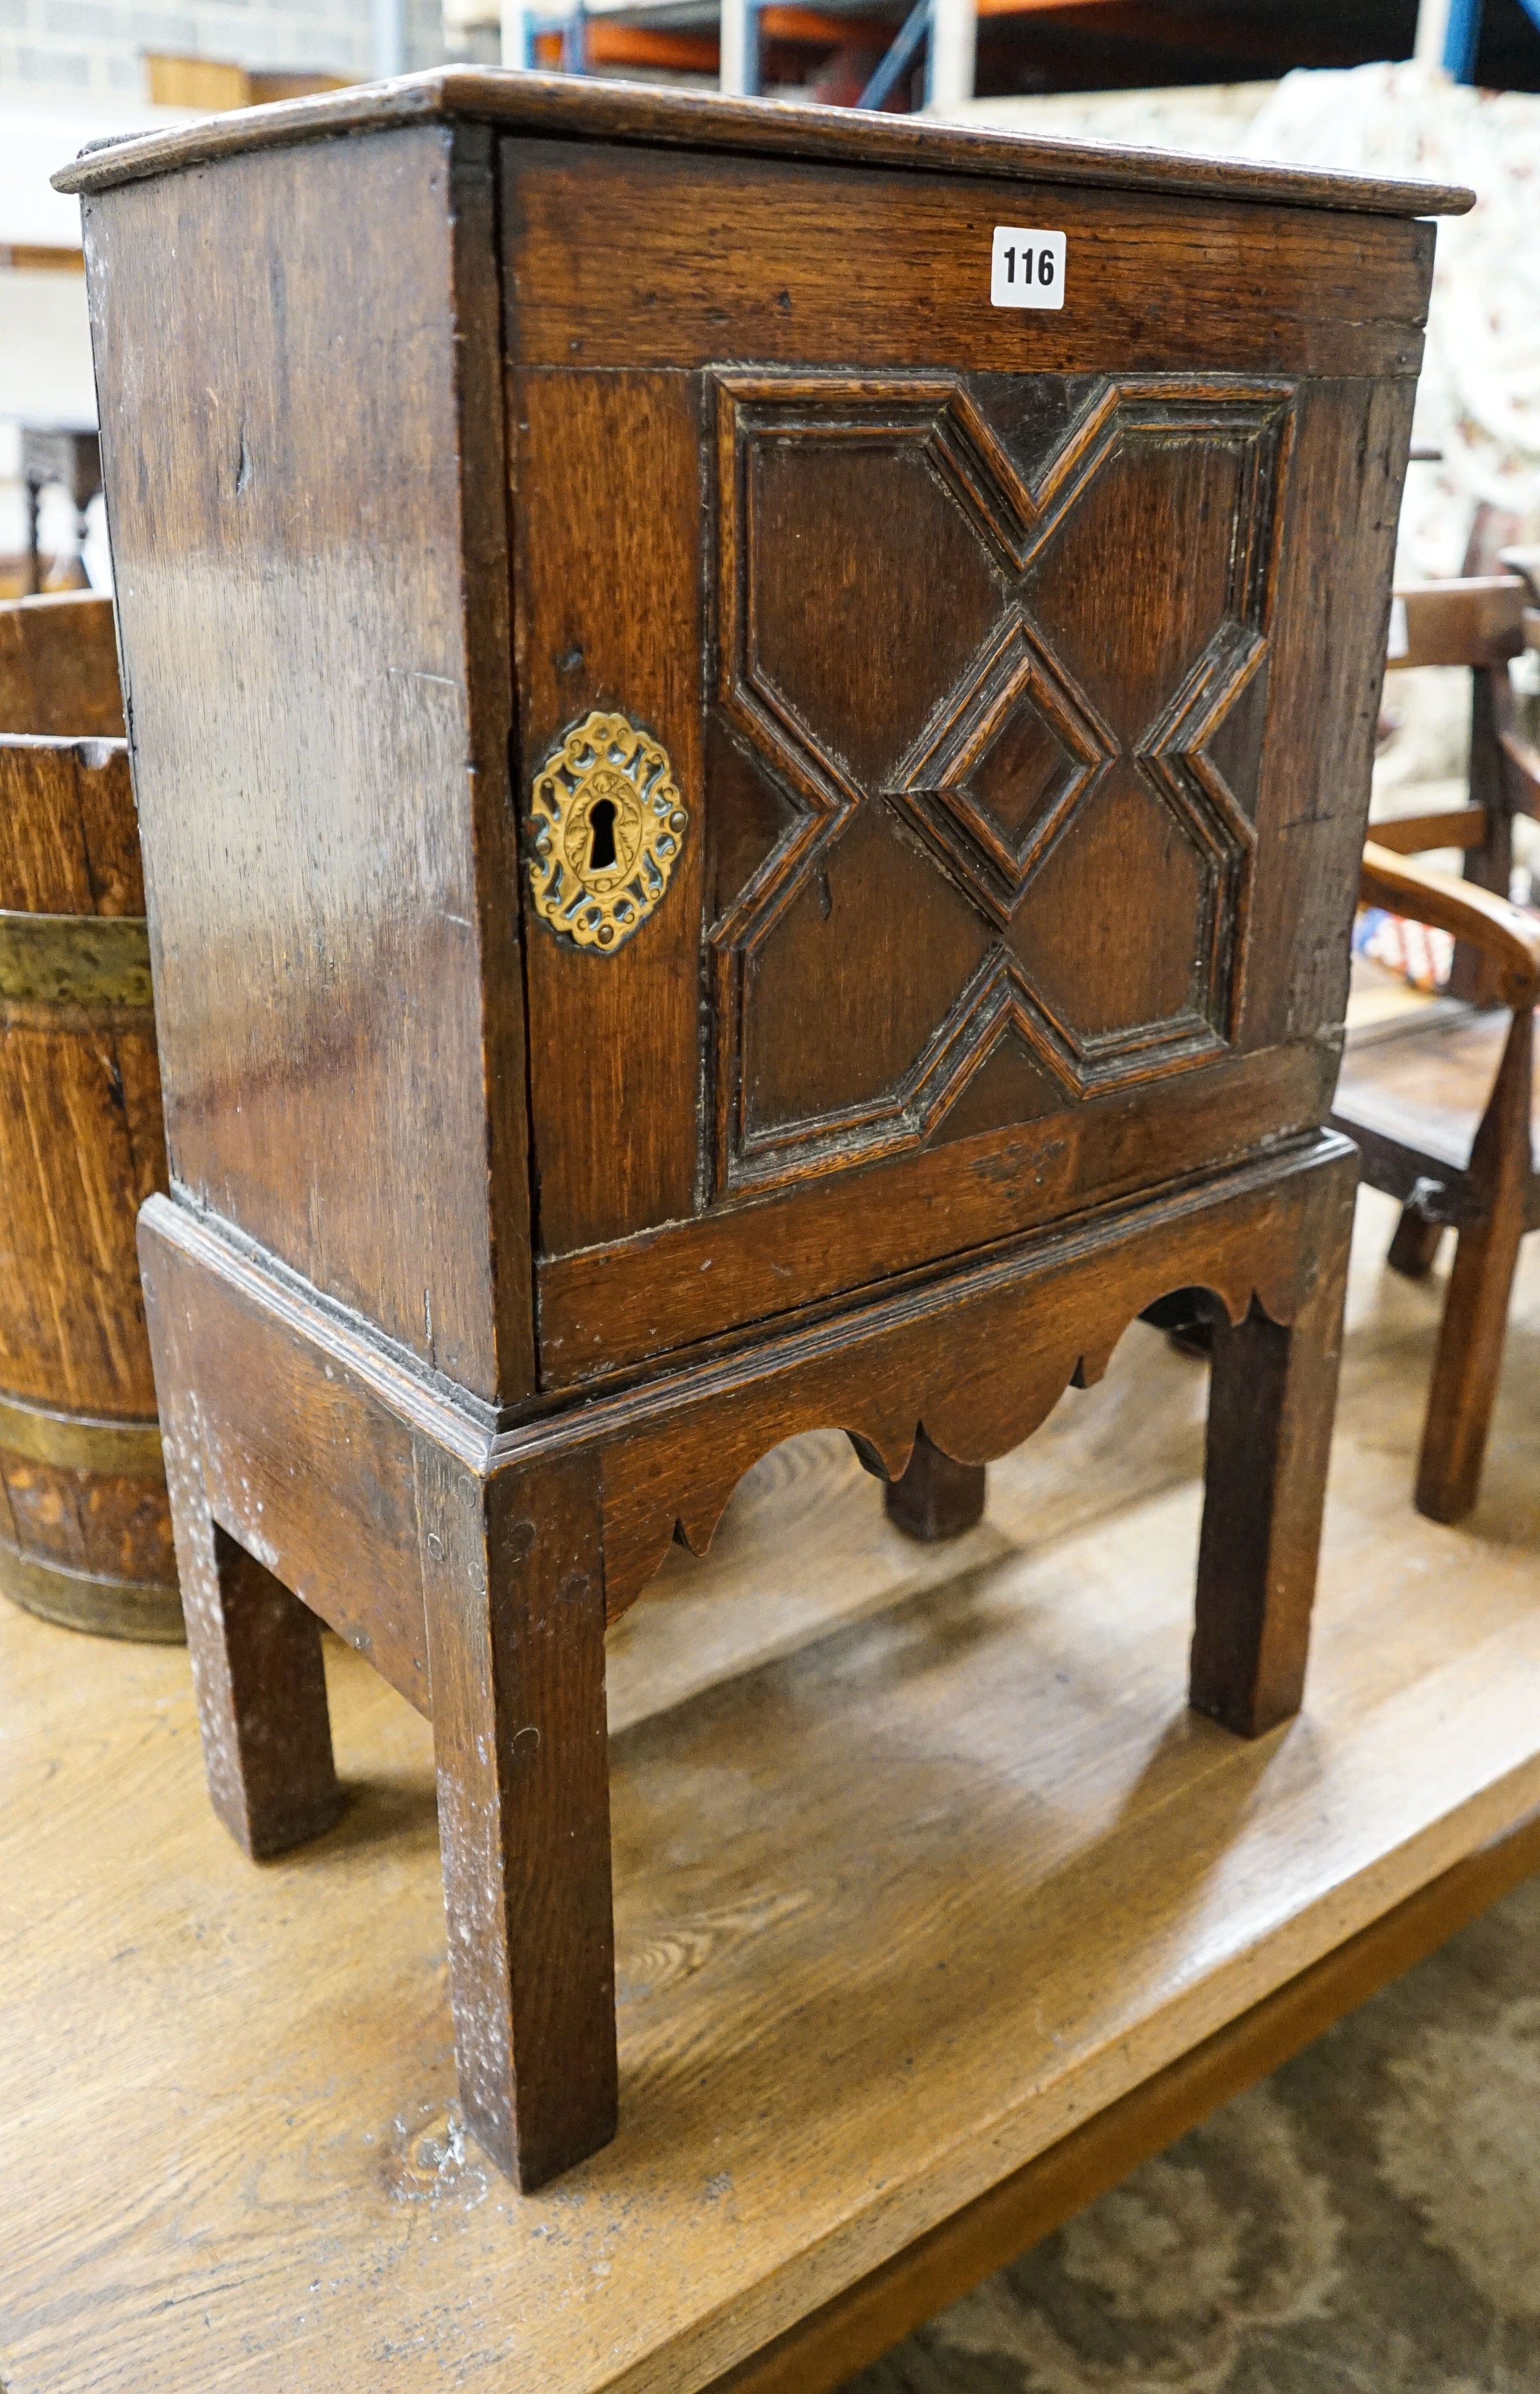 A late 17th century oak spice cupboard, with geometric panelled door enclosing five small drawers,